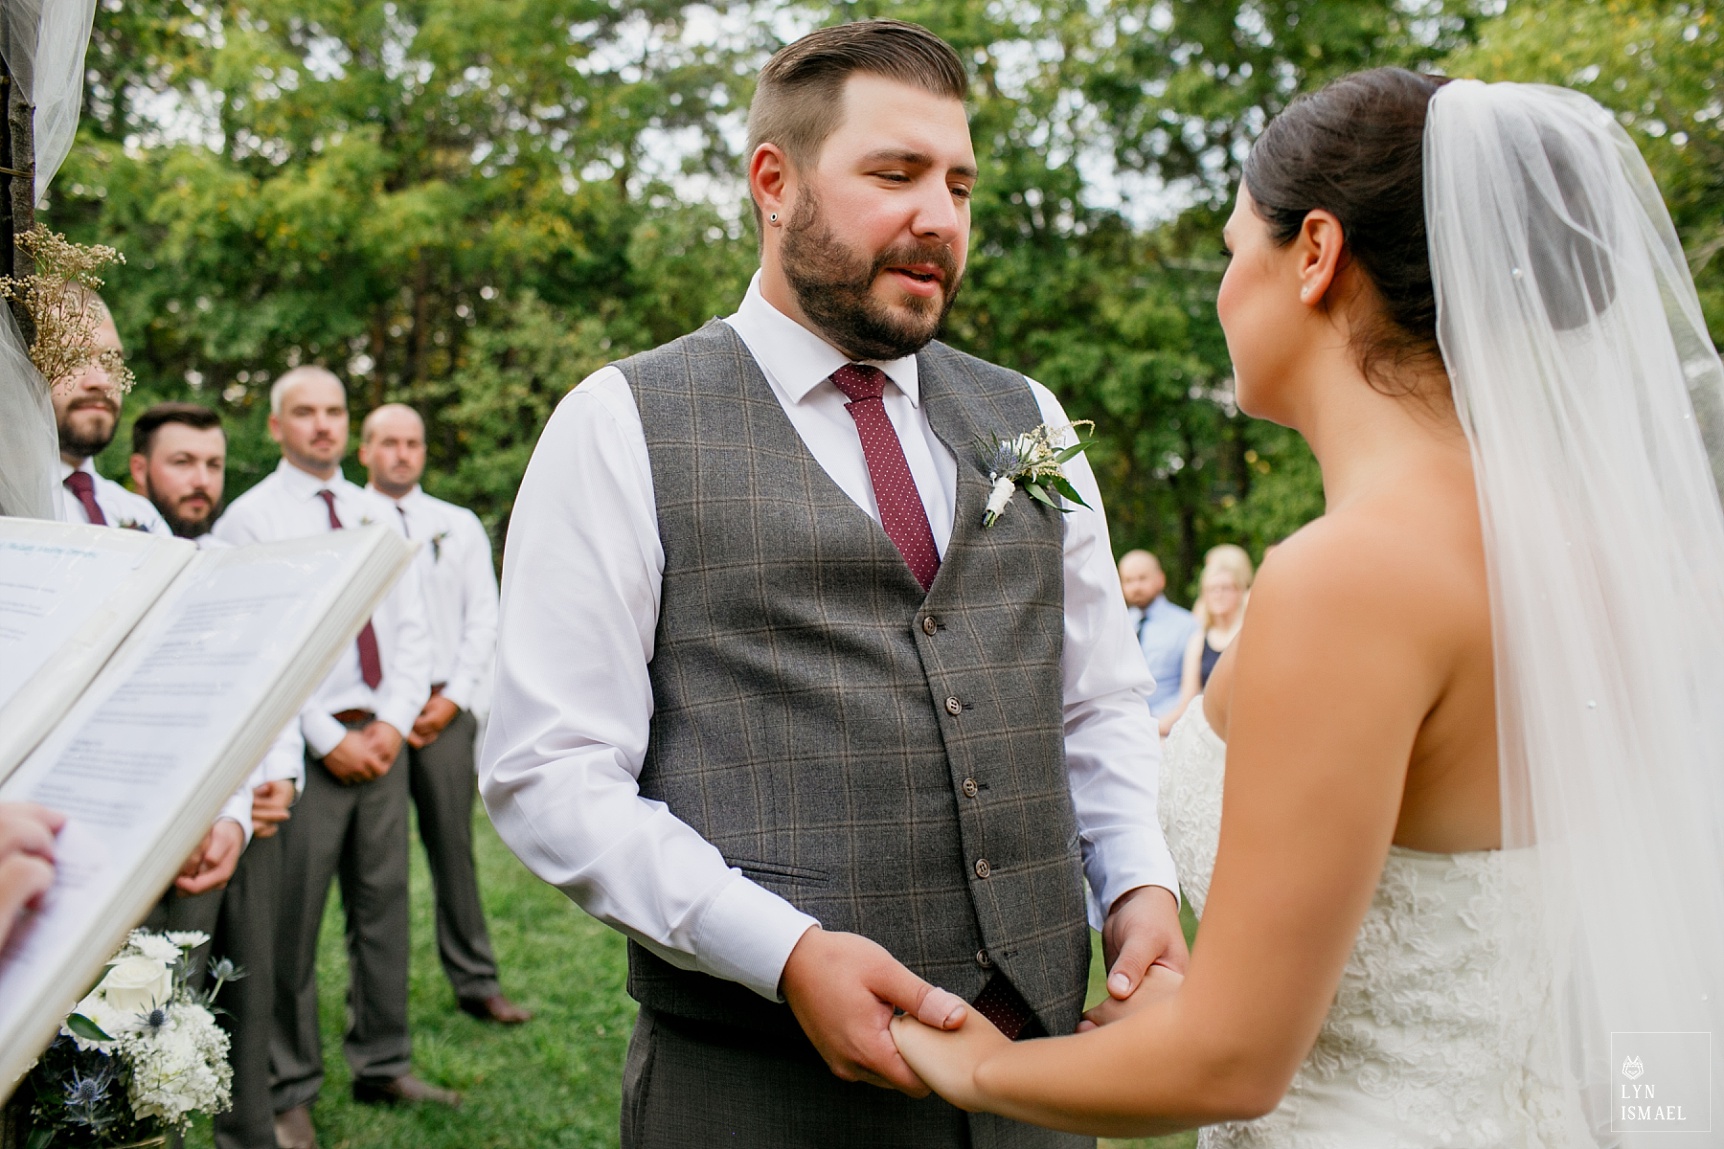 Bride and groom exchanges vows at their apple orchard wedding ceremony at Steckle Heritage Farm